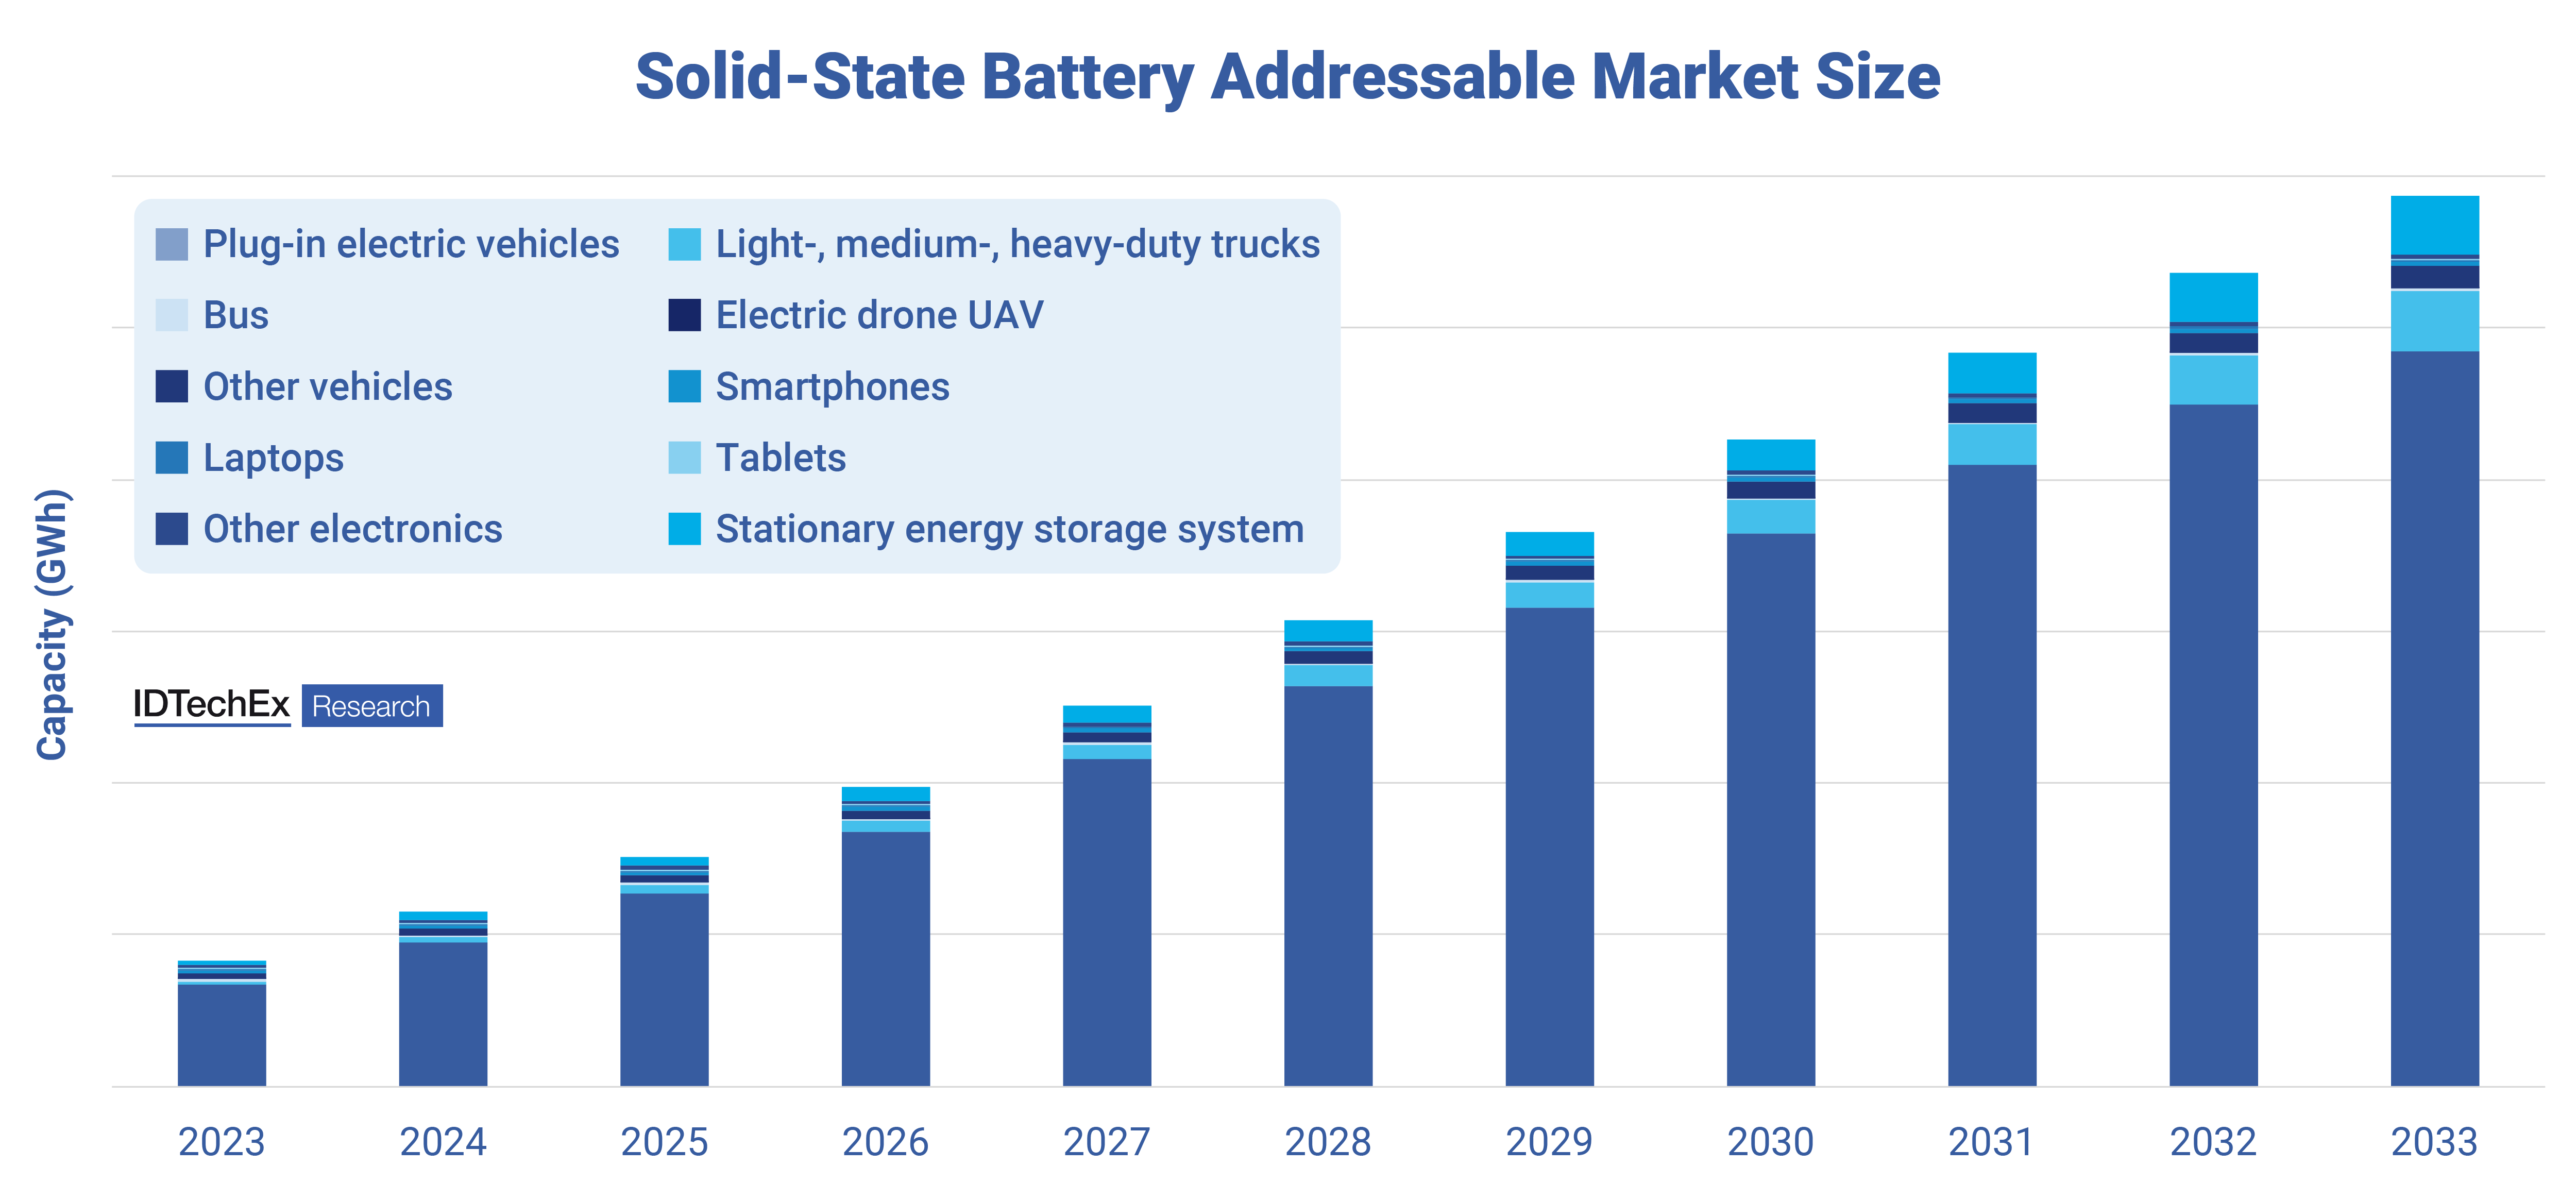 Solid-state battery addressable market size. Source: IDTechEx